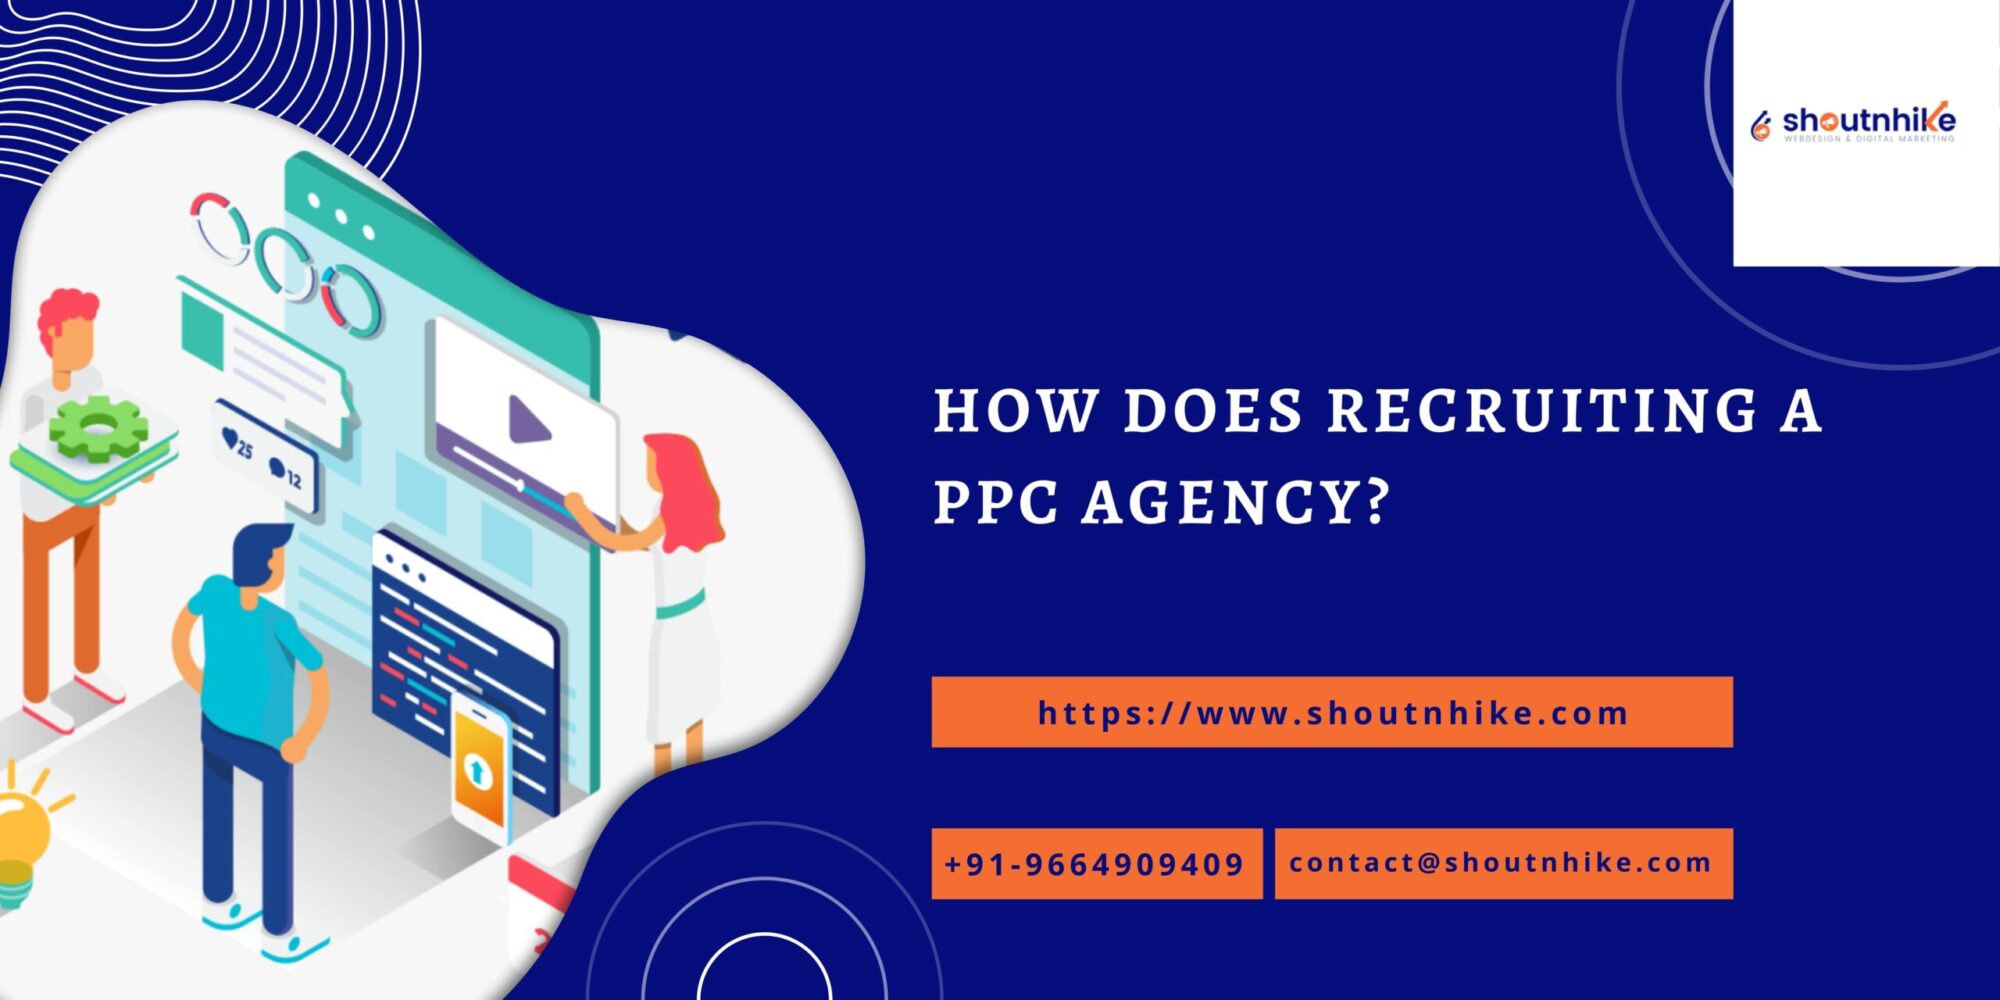 How does recruiting a PPC agency